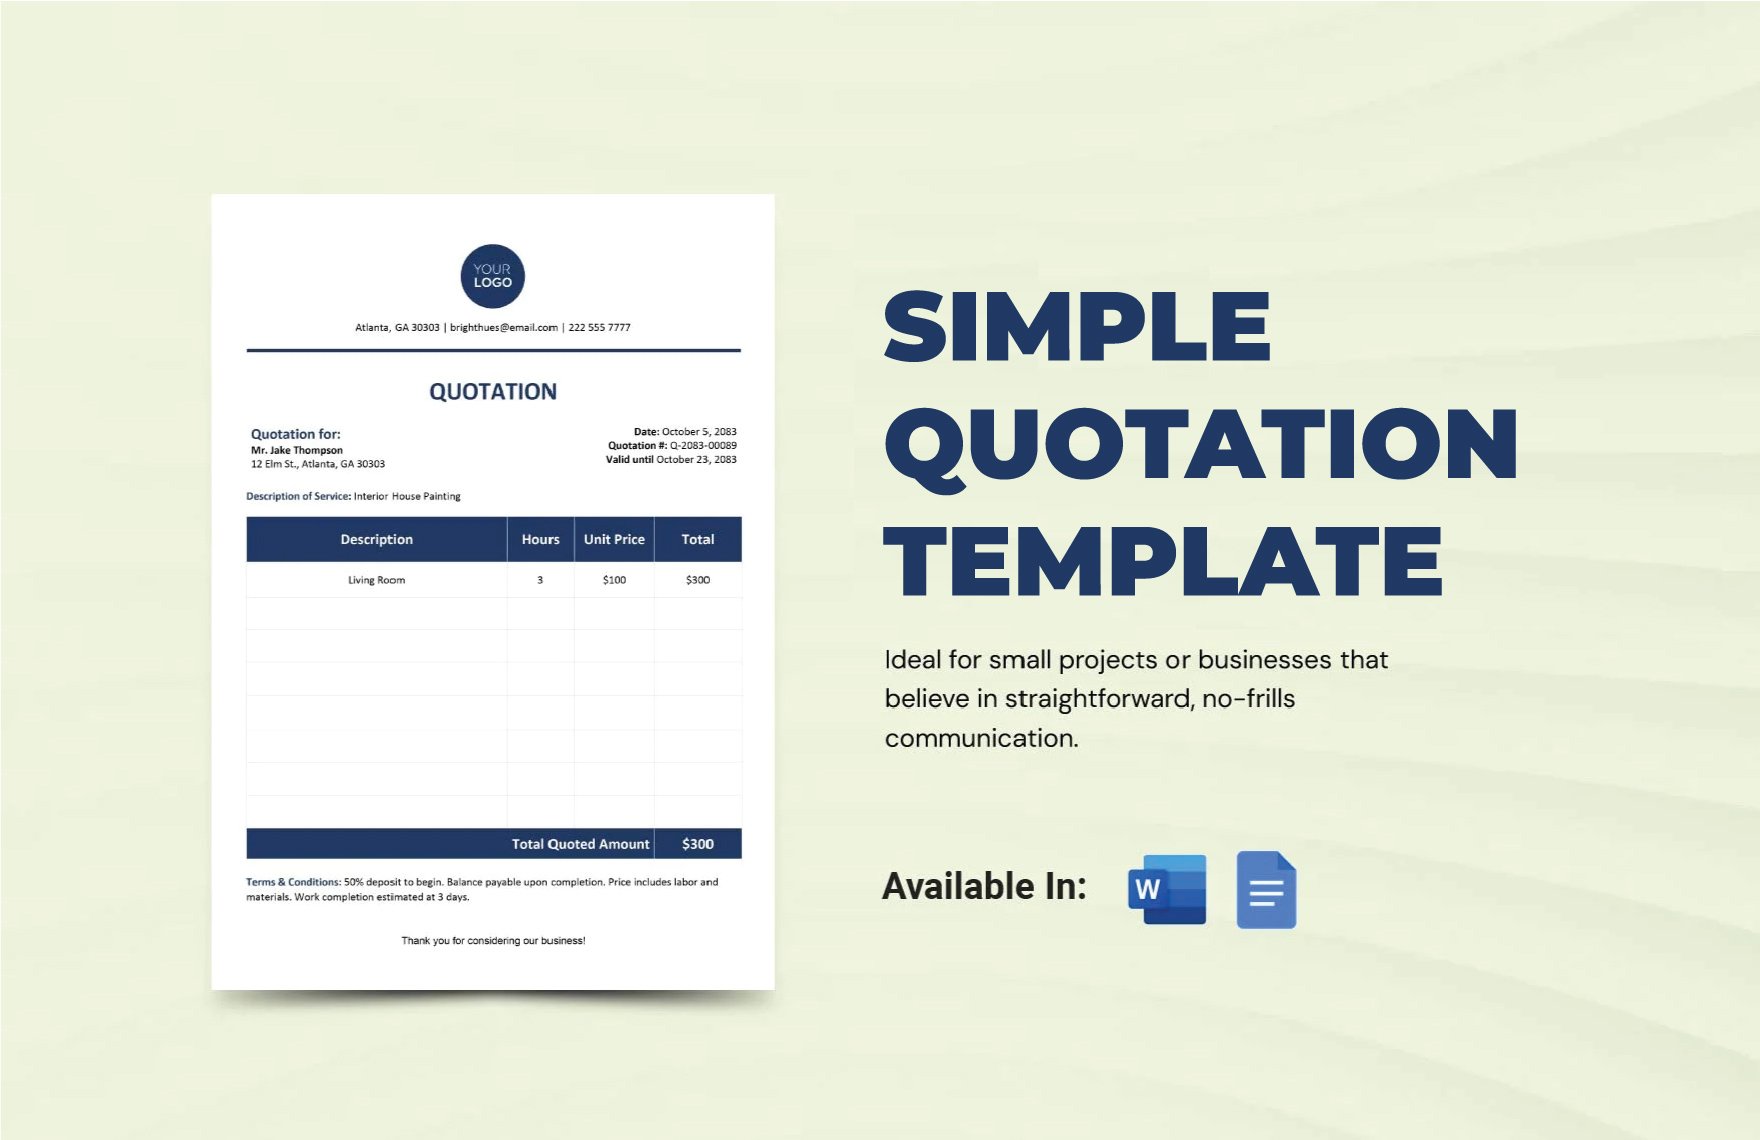 Free Simple Quotation Template in Word, Google Docs